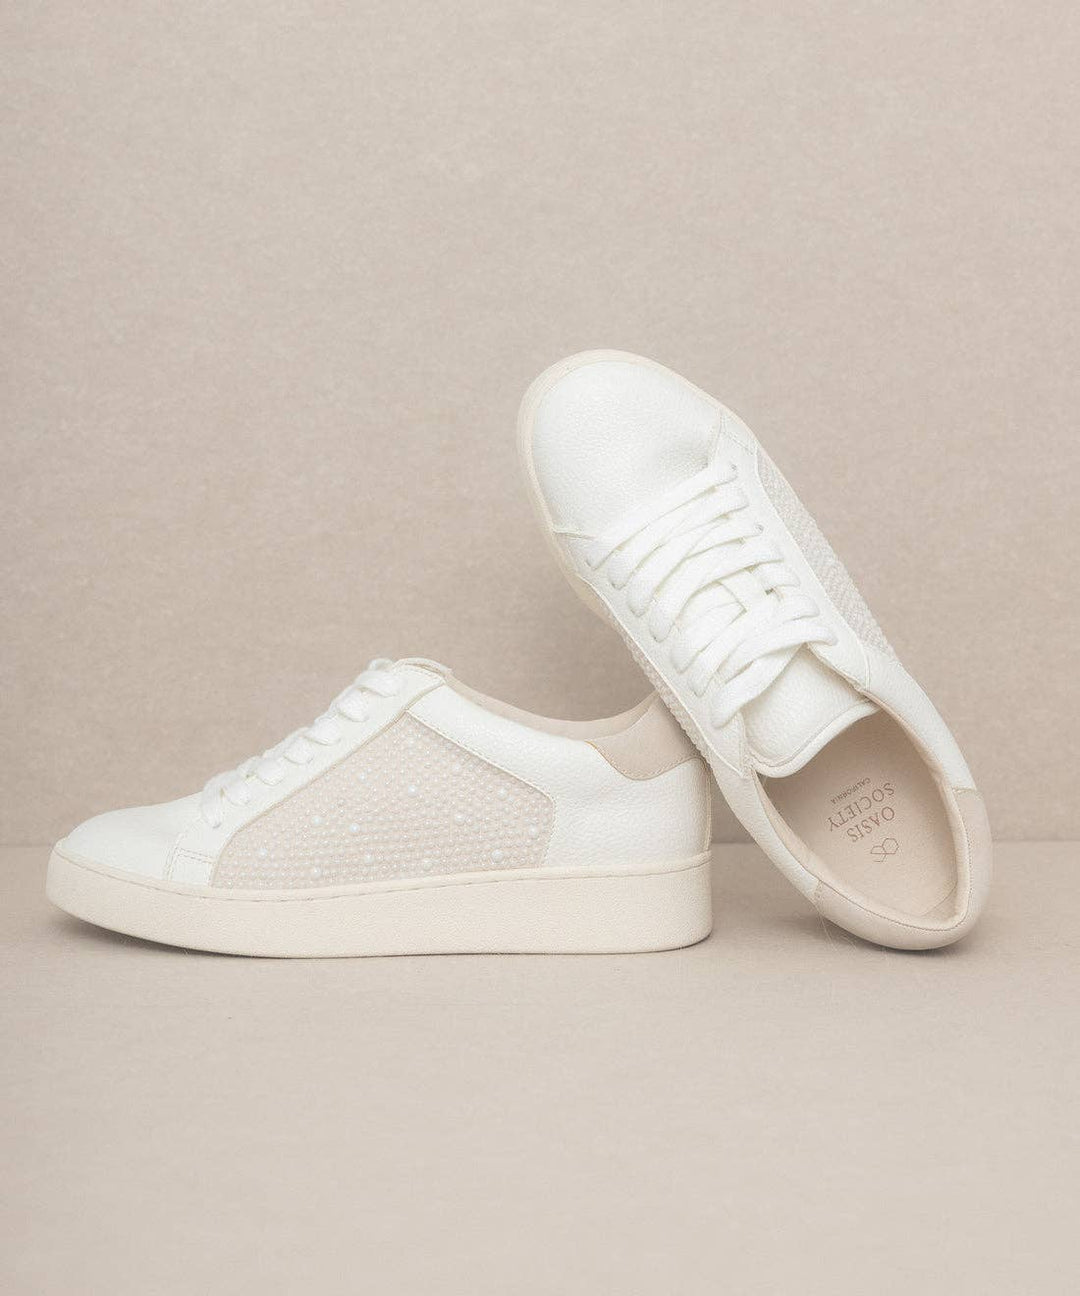 Pearl Studded Paneled Sneaker